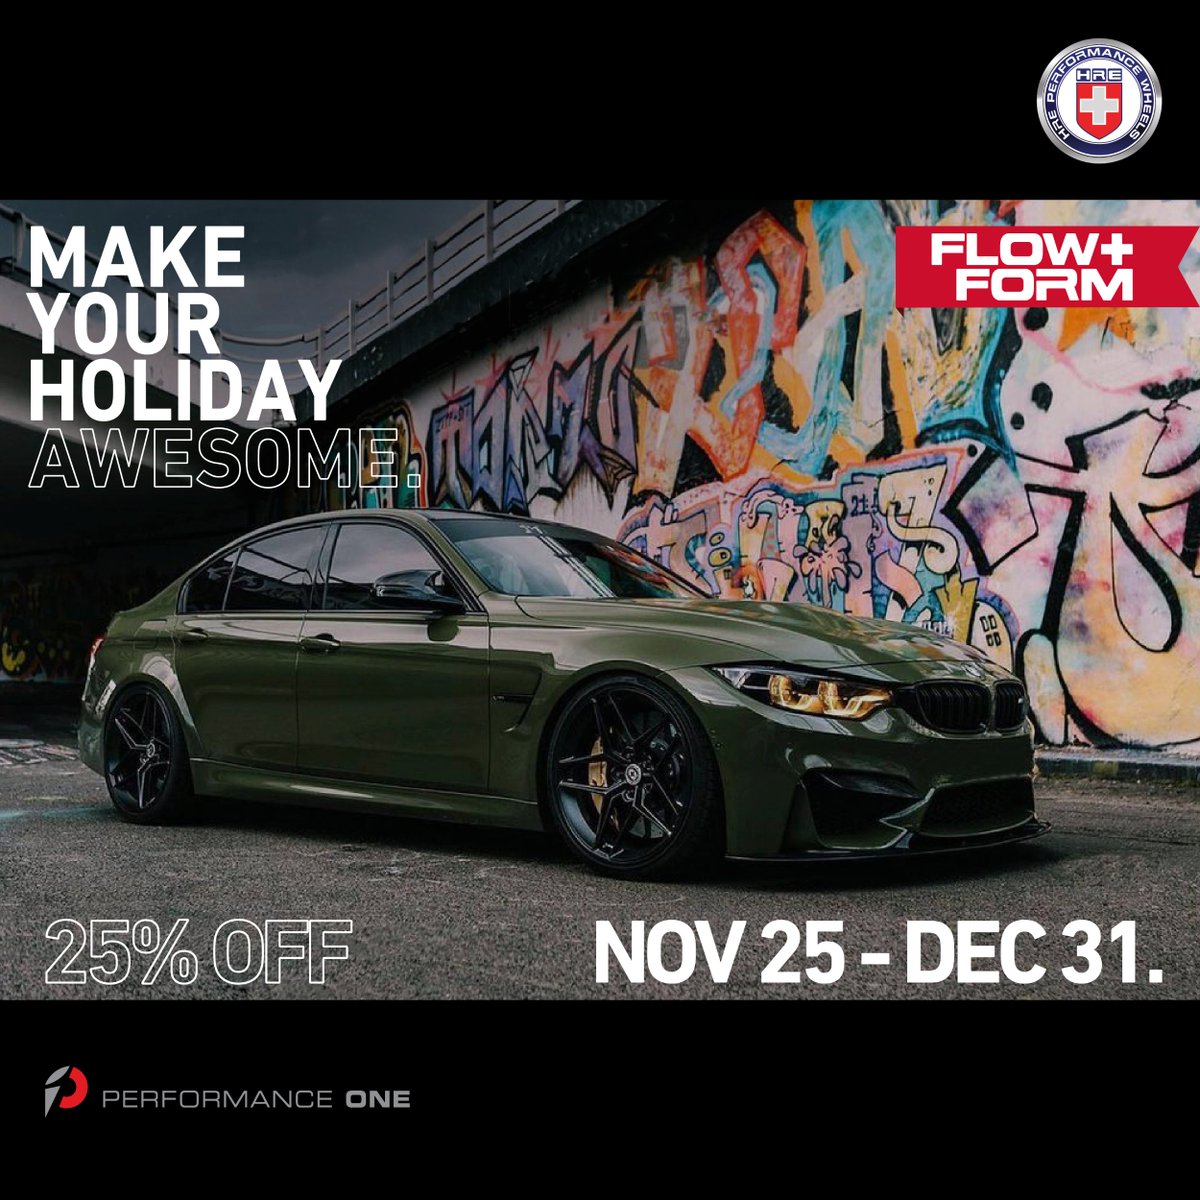 There's still time to spice up the holidays this year - all in stock @FlowForm_Wheels are 25% OFF until December 31st! · Contact us for more details | ✉️: info@performanceone.ca . . . . . . #hrewheels #flowformwheels #industrystandard #holidaysale #25off #bmw #mcars #bmwm